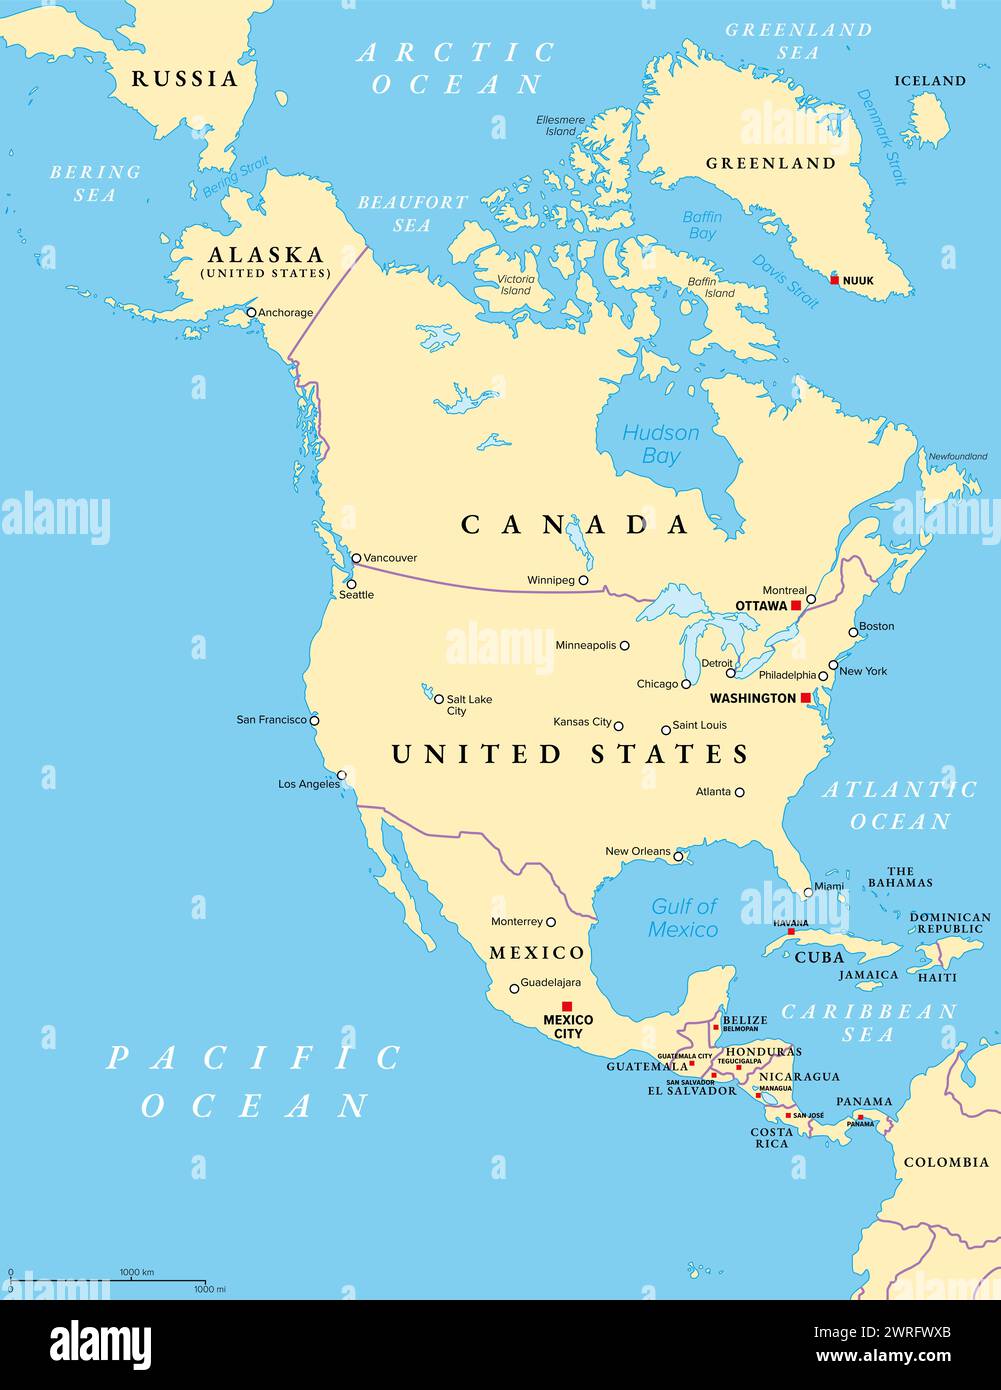 North America, political map. Continent bordered by South America, the Caribbean Sea, and by the Arctic, Atlantic and Pacific Ocean. Stock Photo